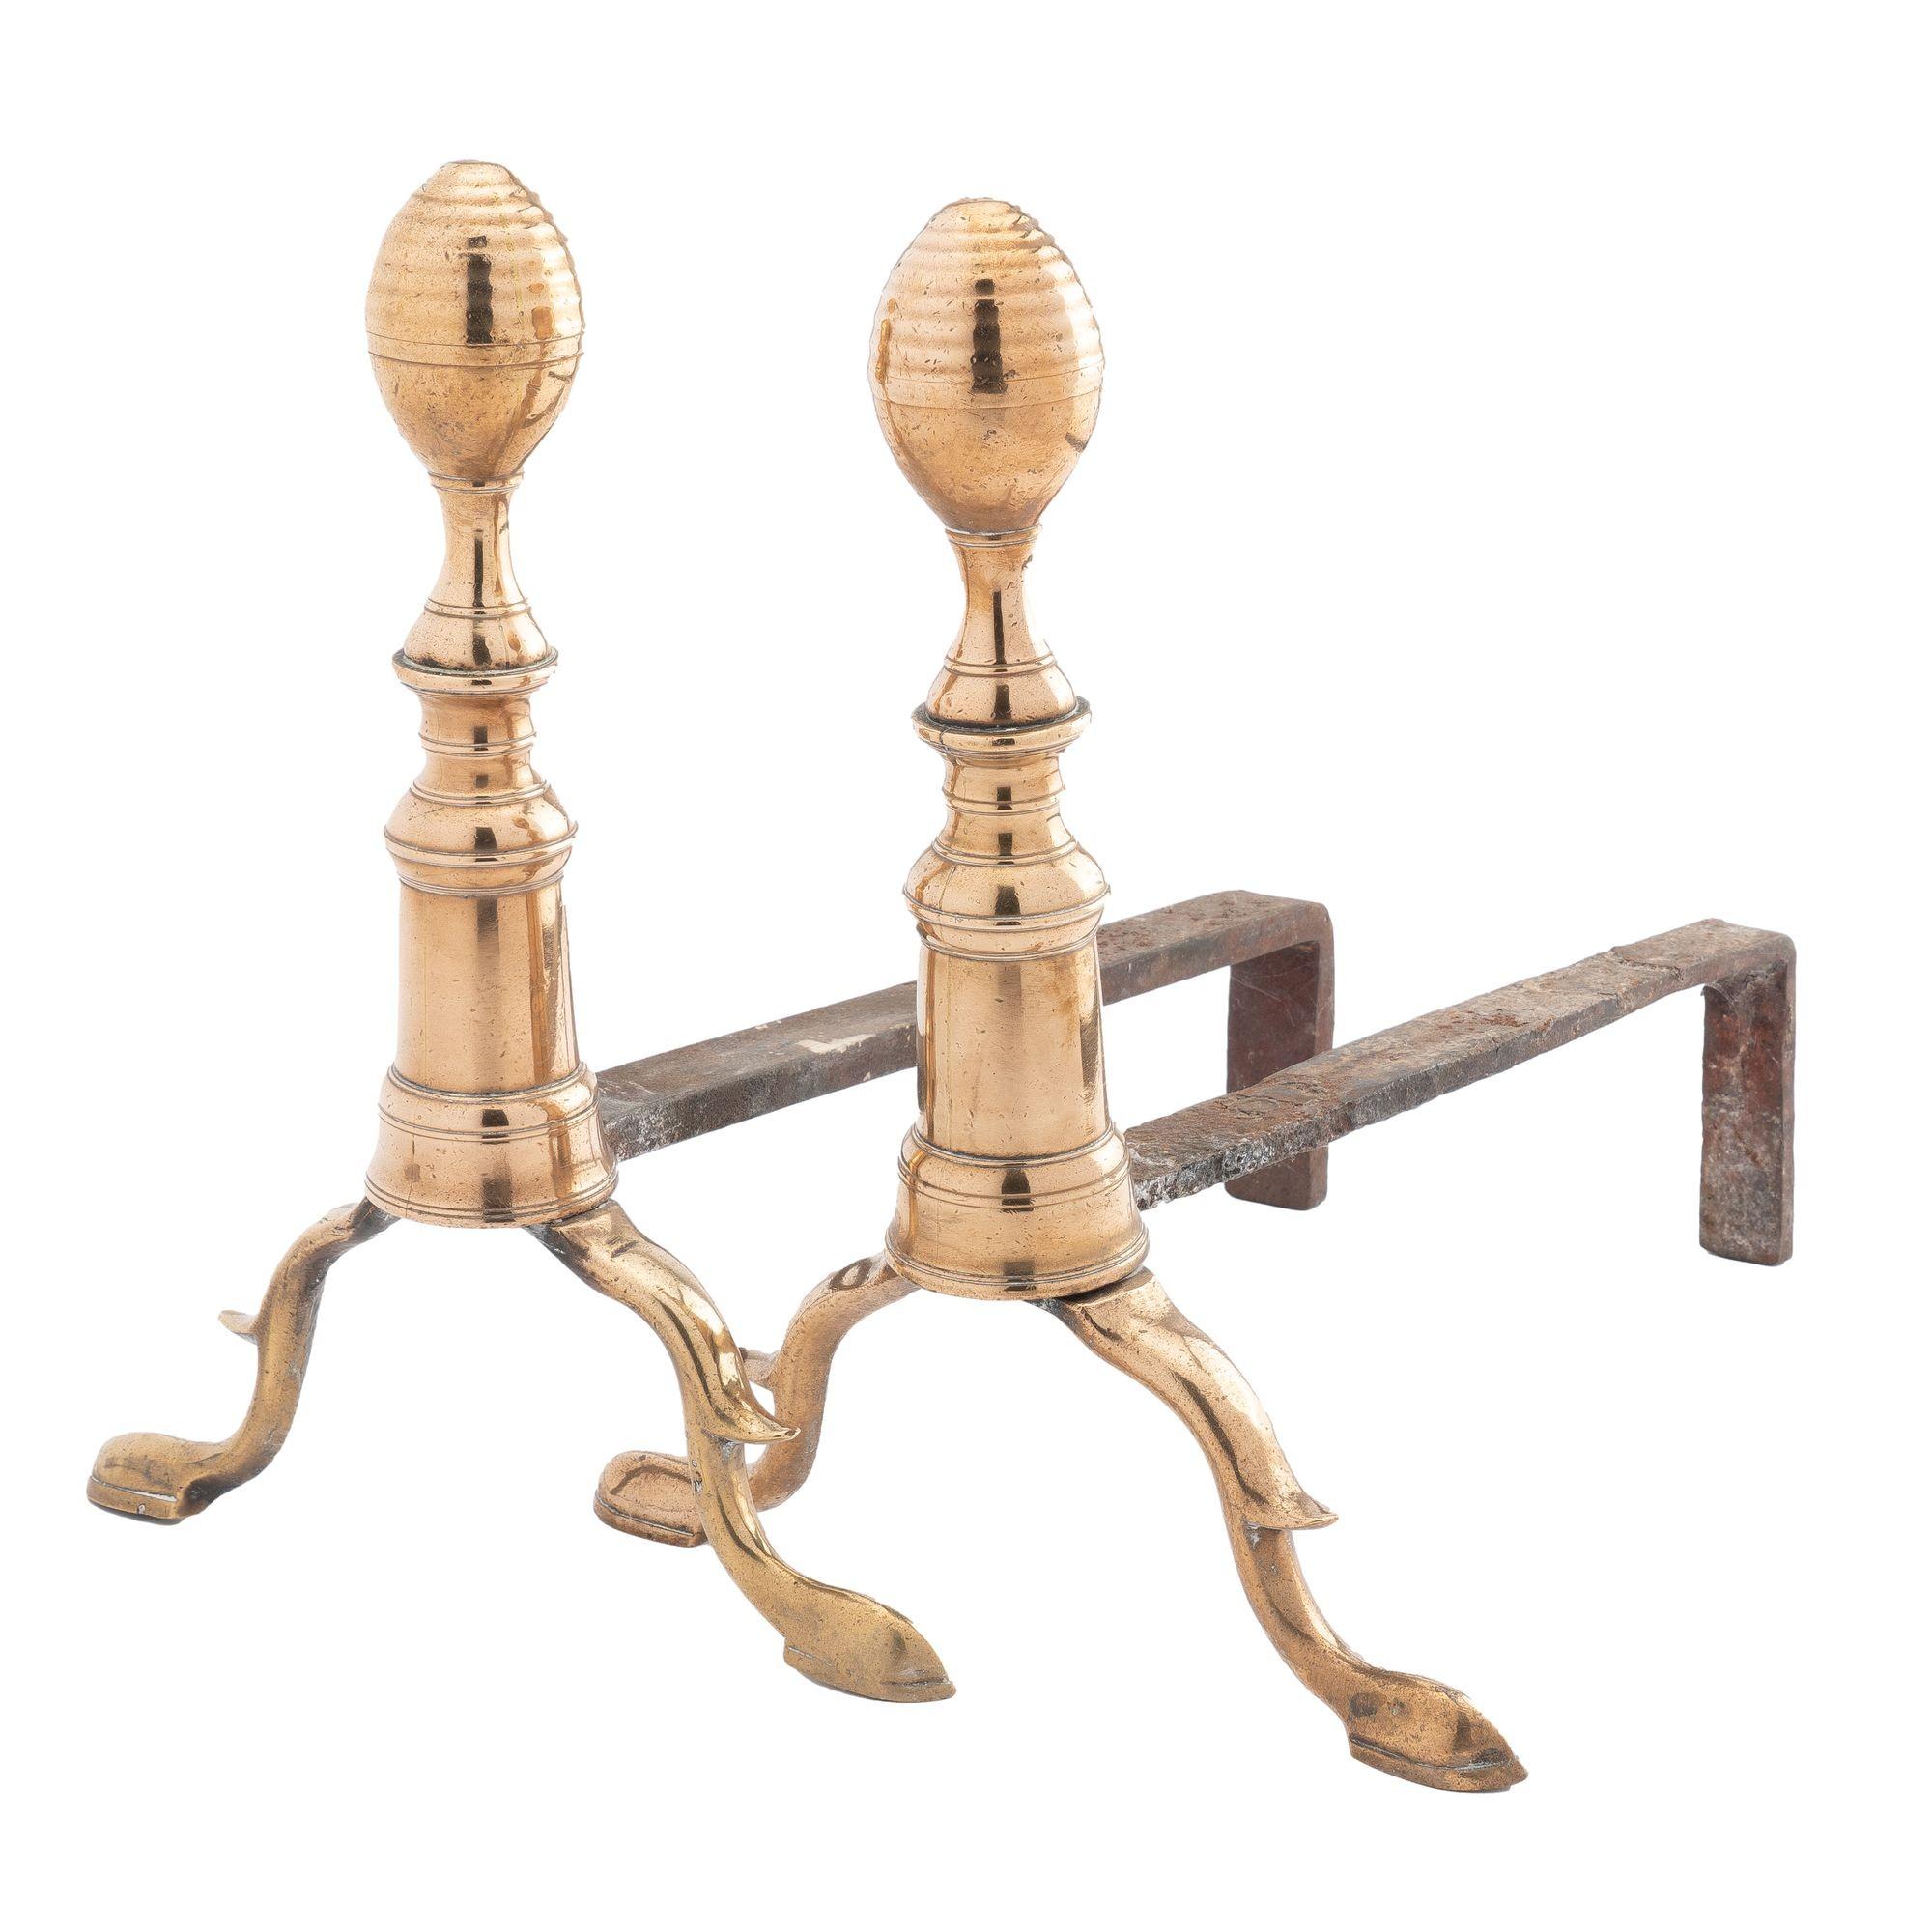 Pair of cast brass half beehive fluted lemon top andirons on turned pedestal & arched spurred legs with slipper feet. The brass is peened to a forged iron log rest and supported by an angled leg.
American, Boston, circa 1790.